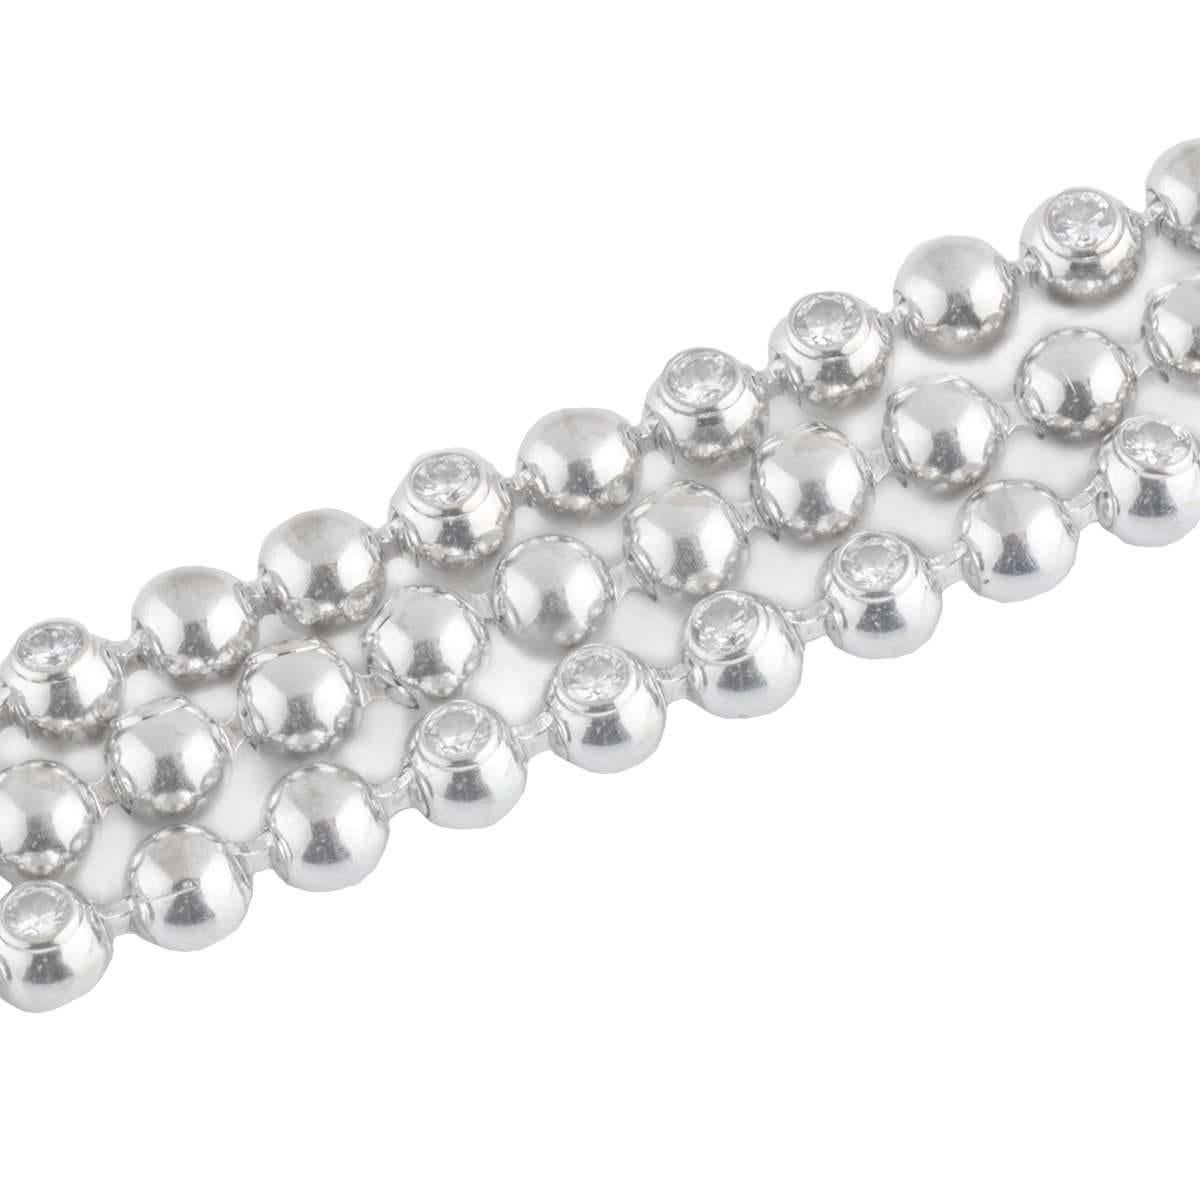 A beautiful 18k white gold choker necklace from the Cartier Moonlight collection. The necklace is composed of 3 strands featuring circular ball motifs, intermittently set with rub over set diamonds. The necklace has a total of 120 round brilliant